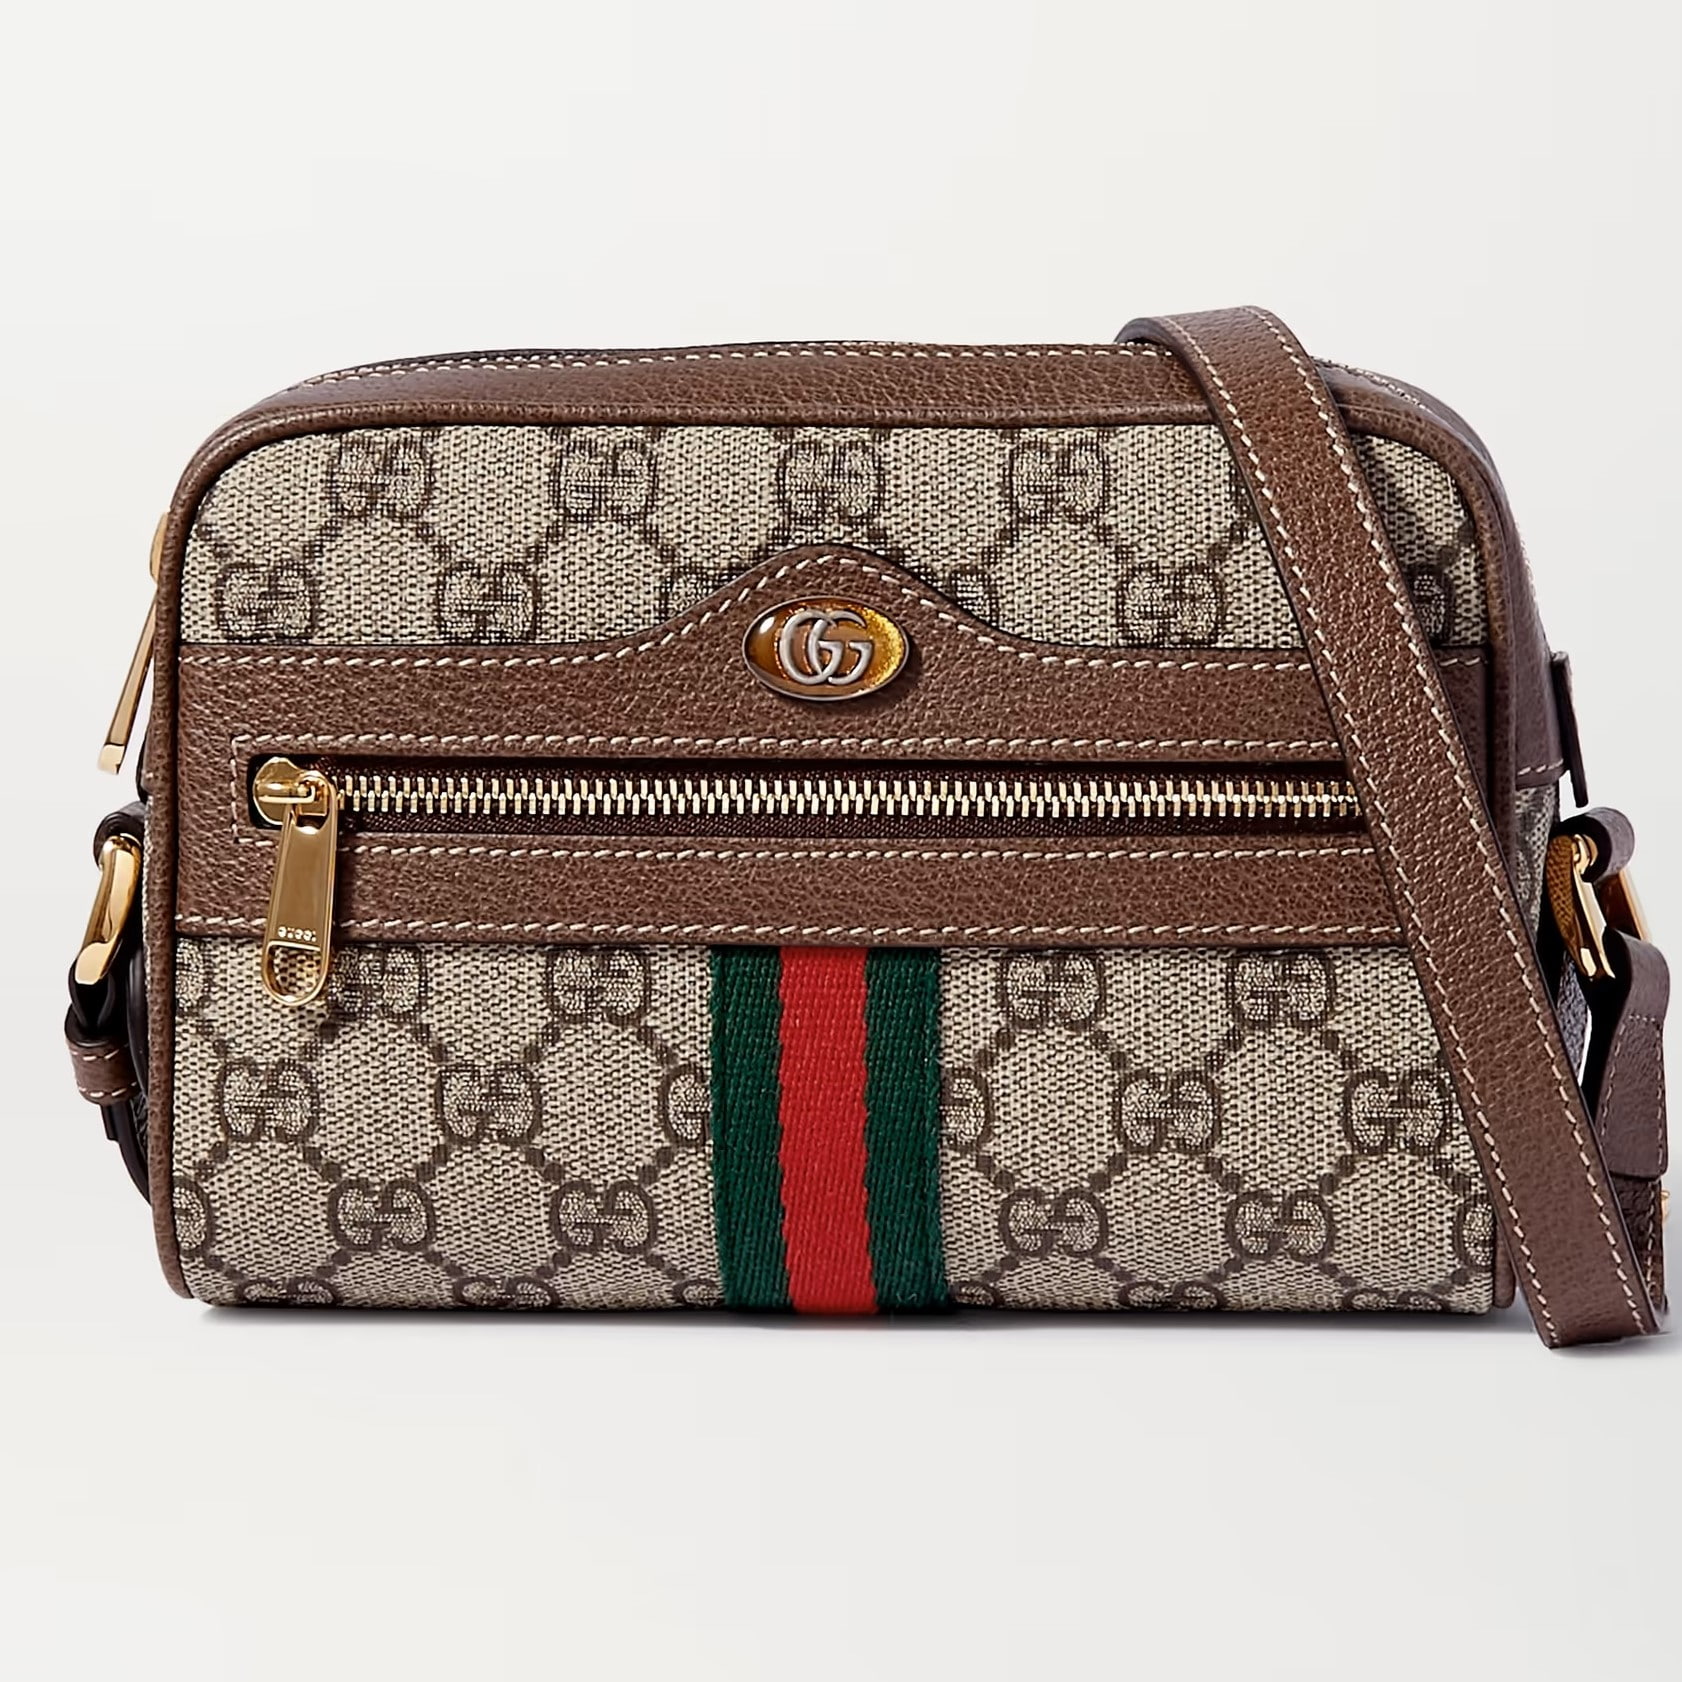 TÚI ĐEO CHÉO GUCCI OPHIDIA SMALL BEIGE LEATHER TRIMMED PRINTED COATED CANVAS CAMERA BAG 5